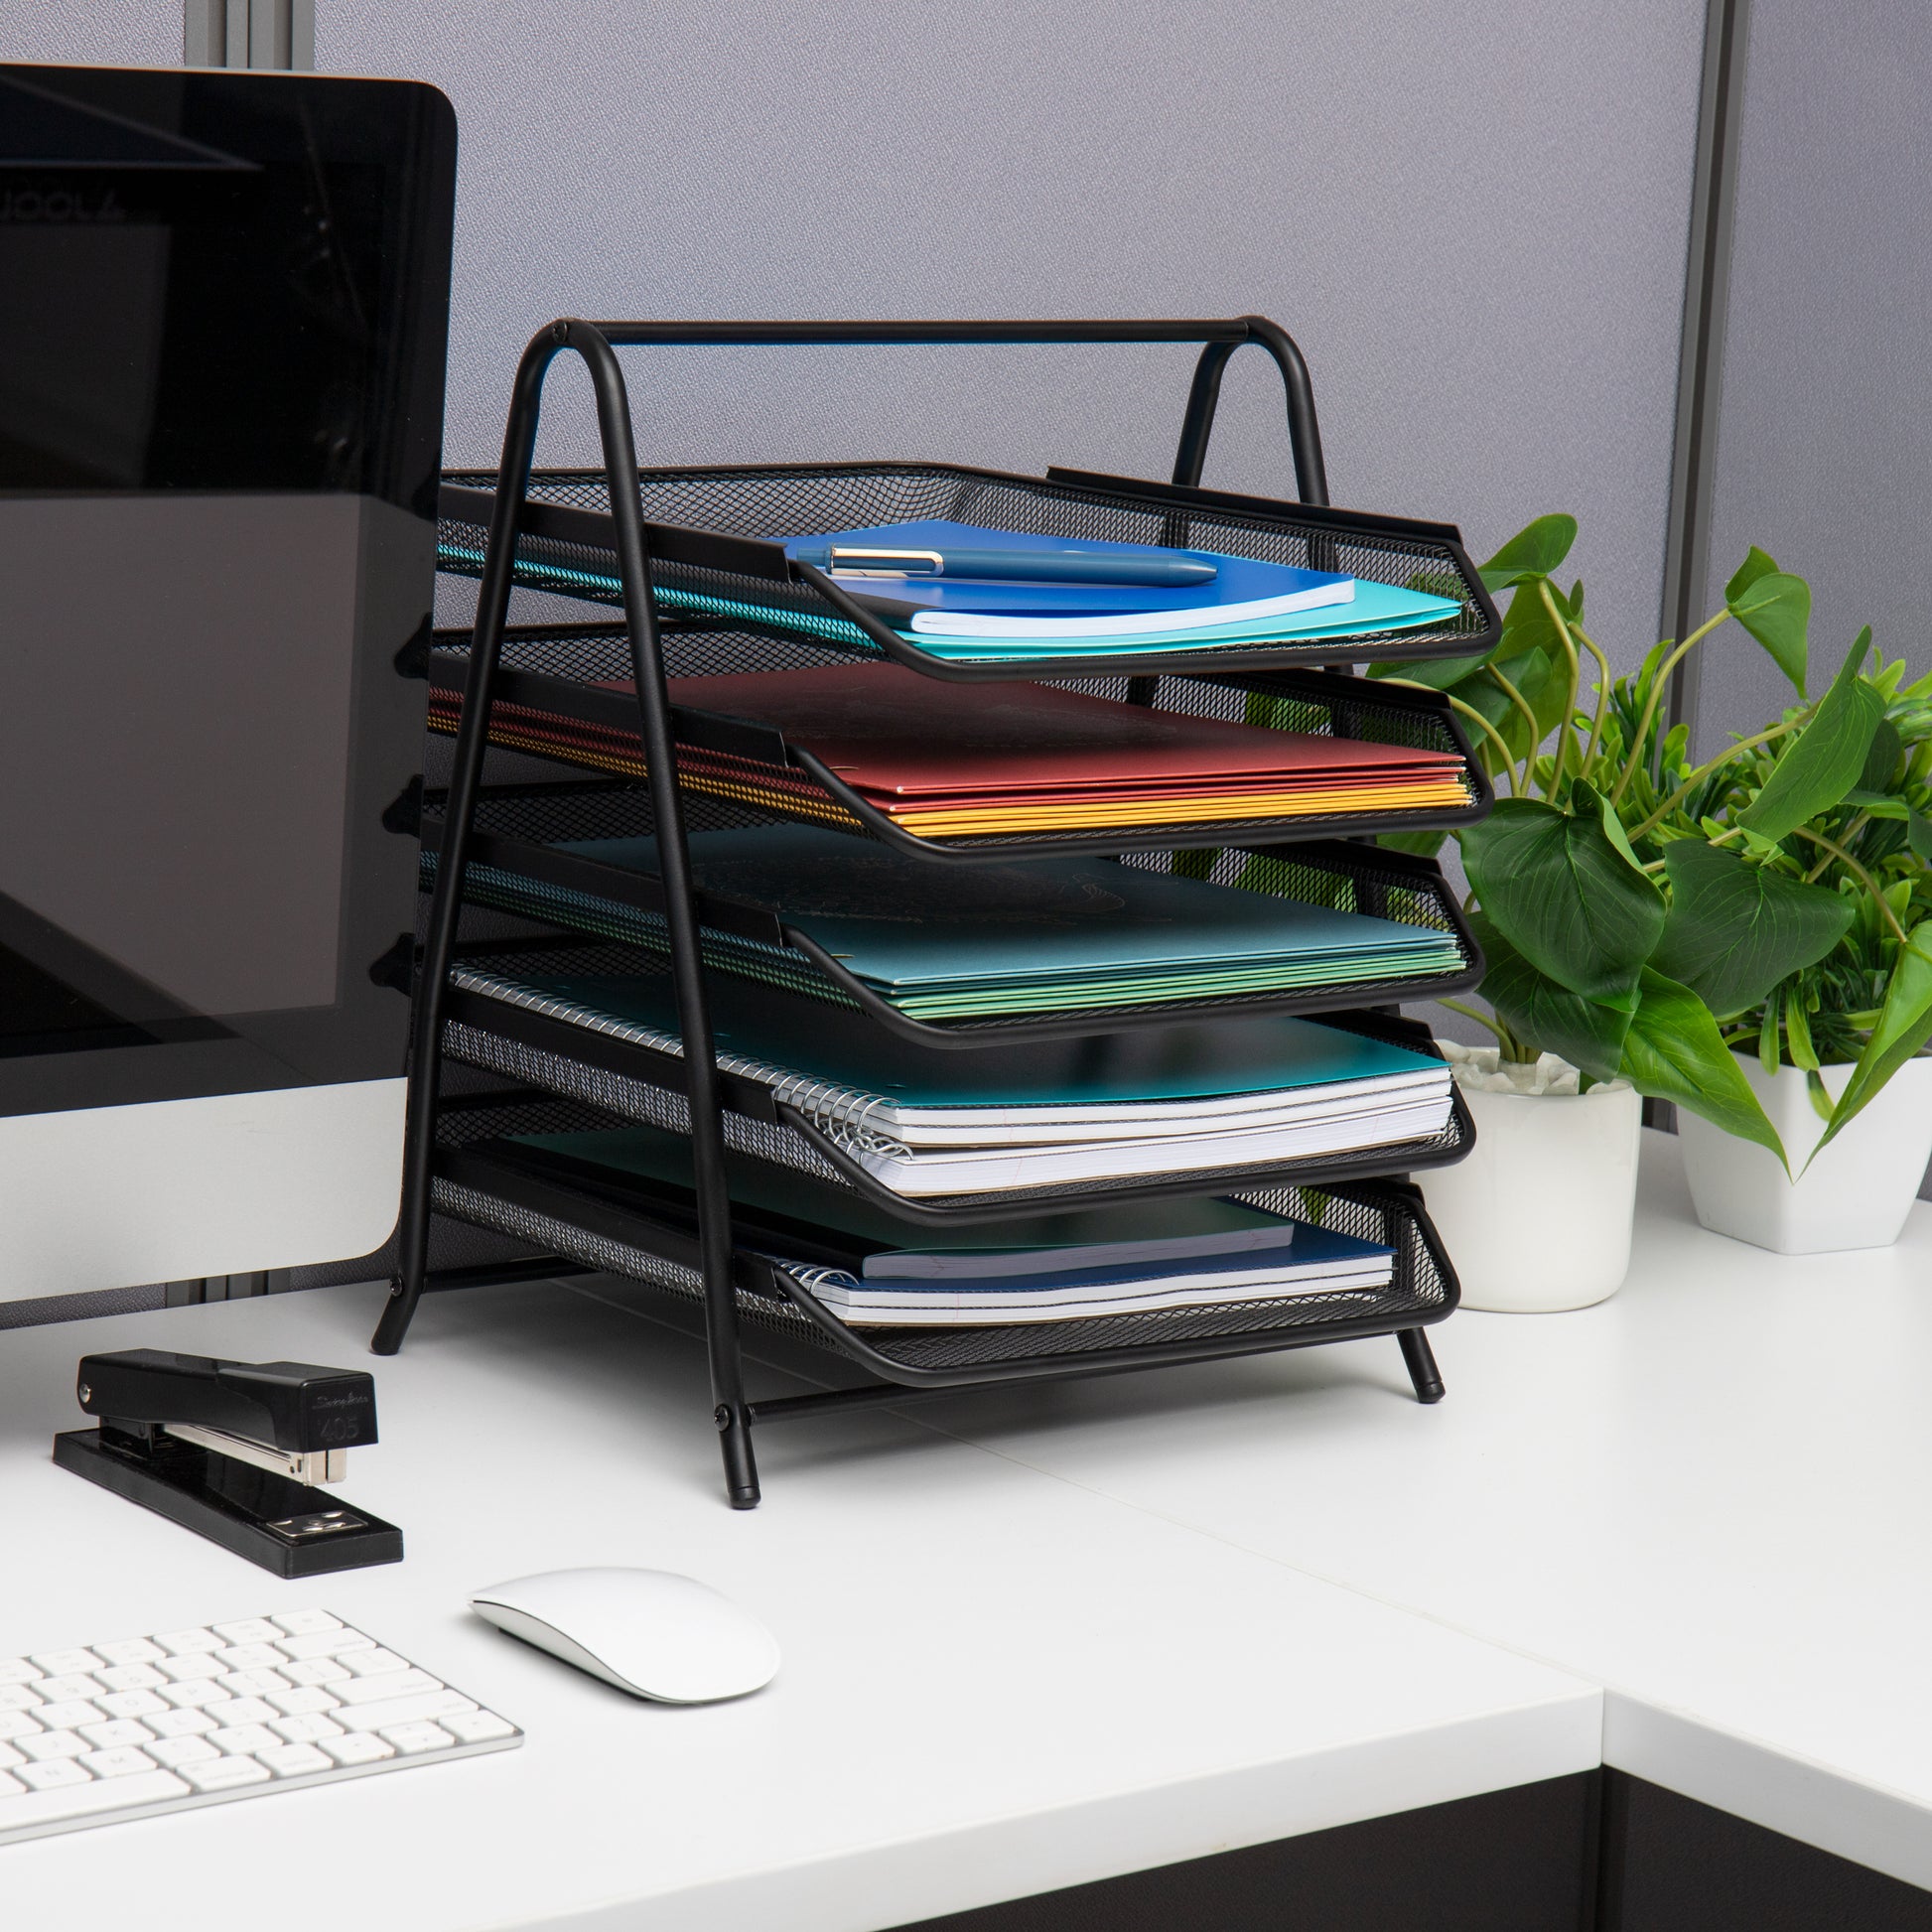 5-Tier Desk Organizer with File Holder, Drawer, and Pen Holders - Mesh  Desktop Storage for Office Supplies and Magazines